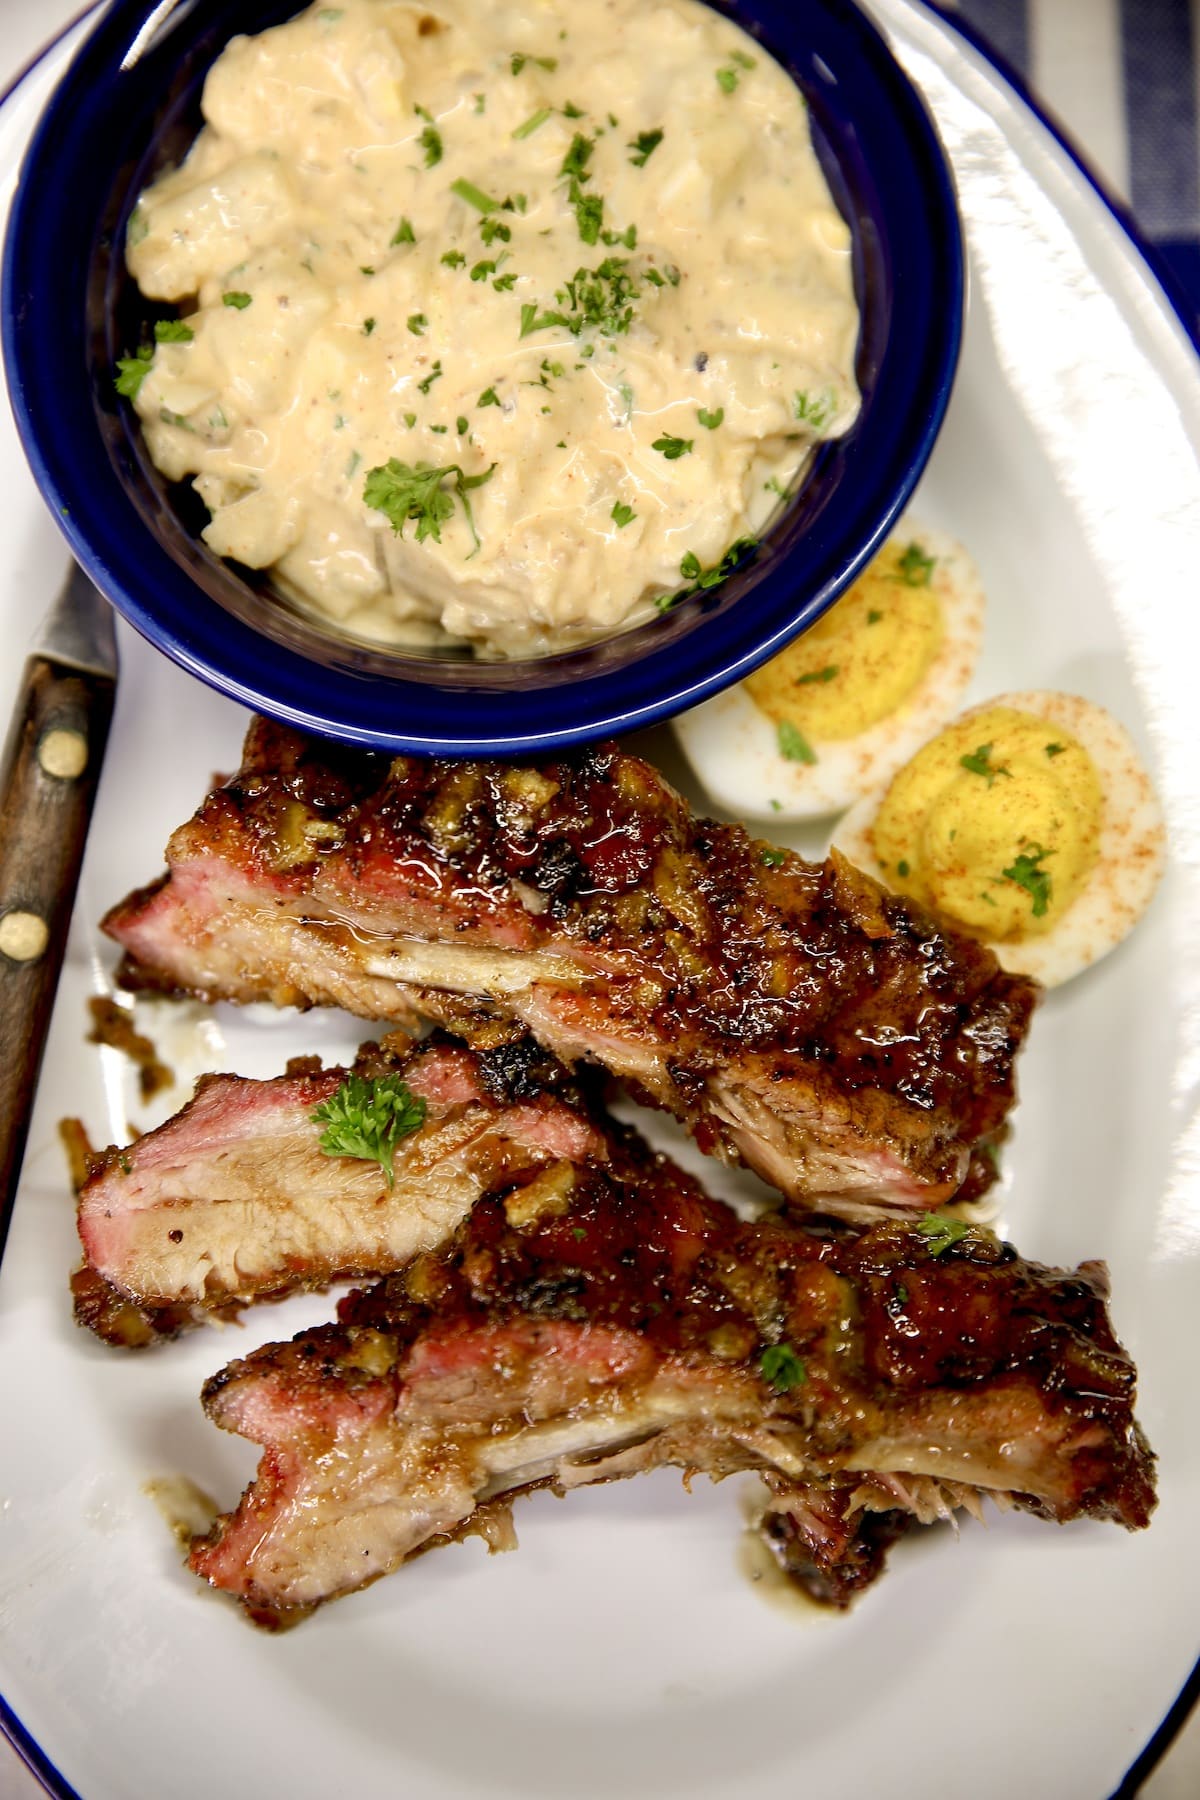 3 ribs on a plate with bowl of potato salad and deviled eggs.